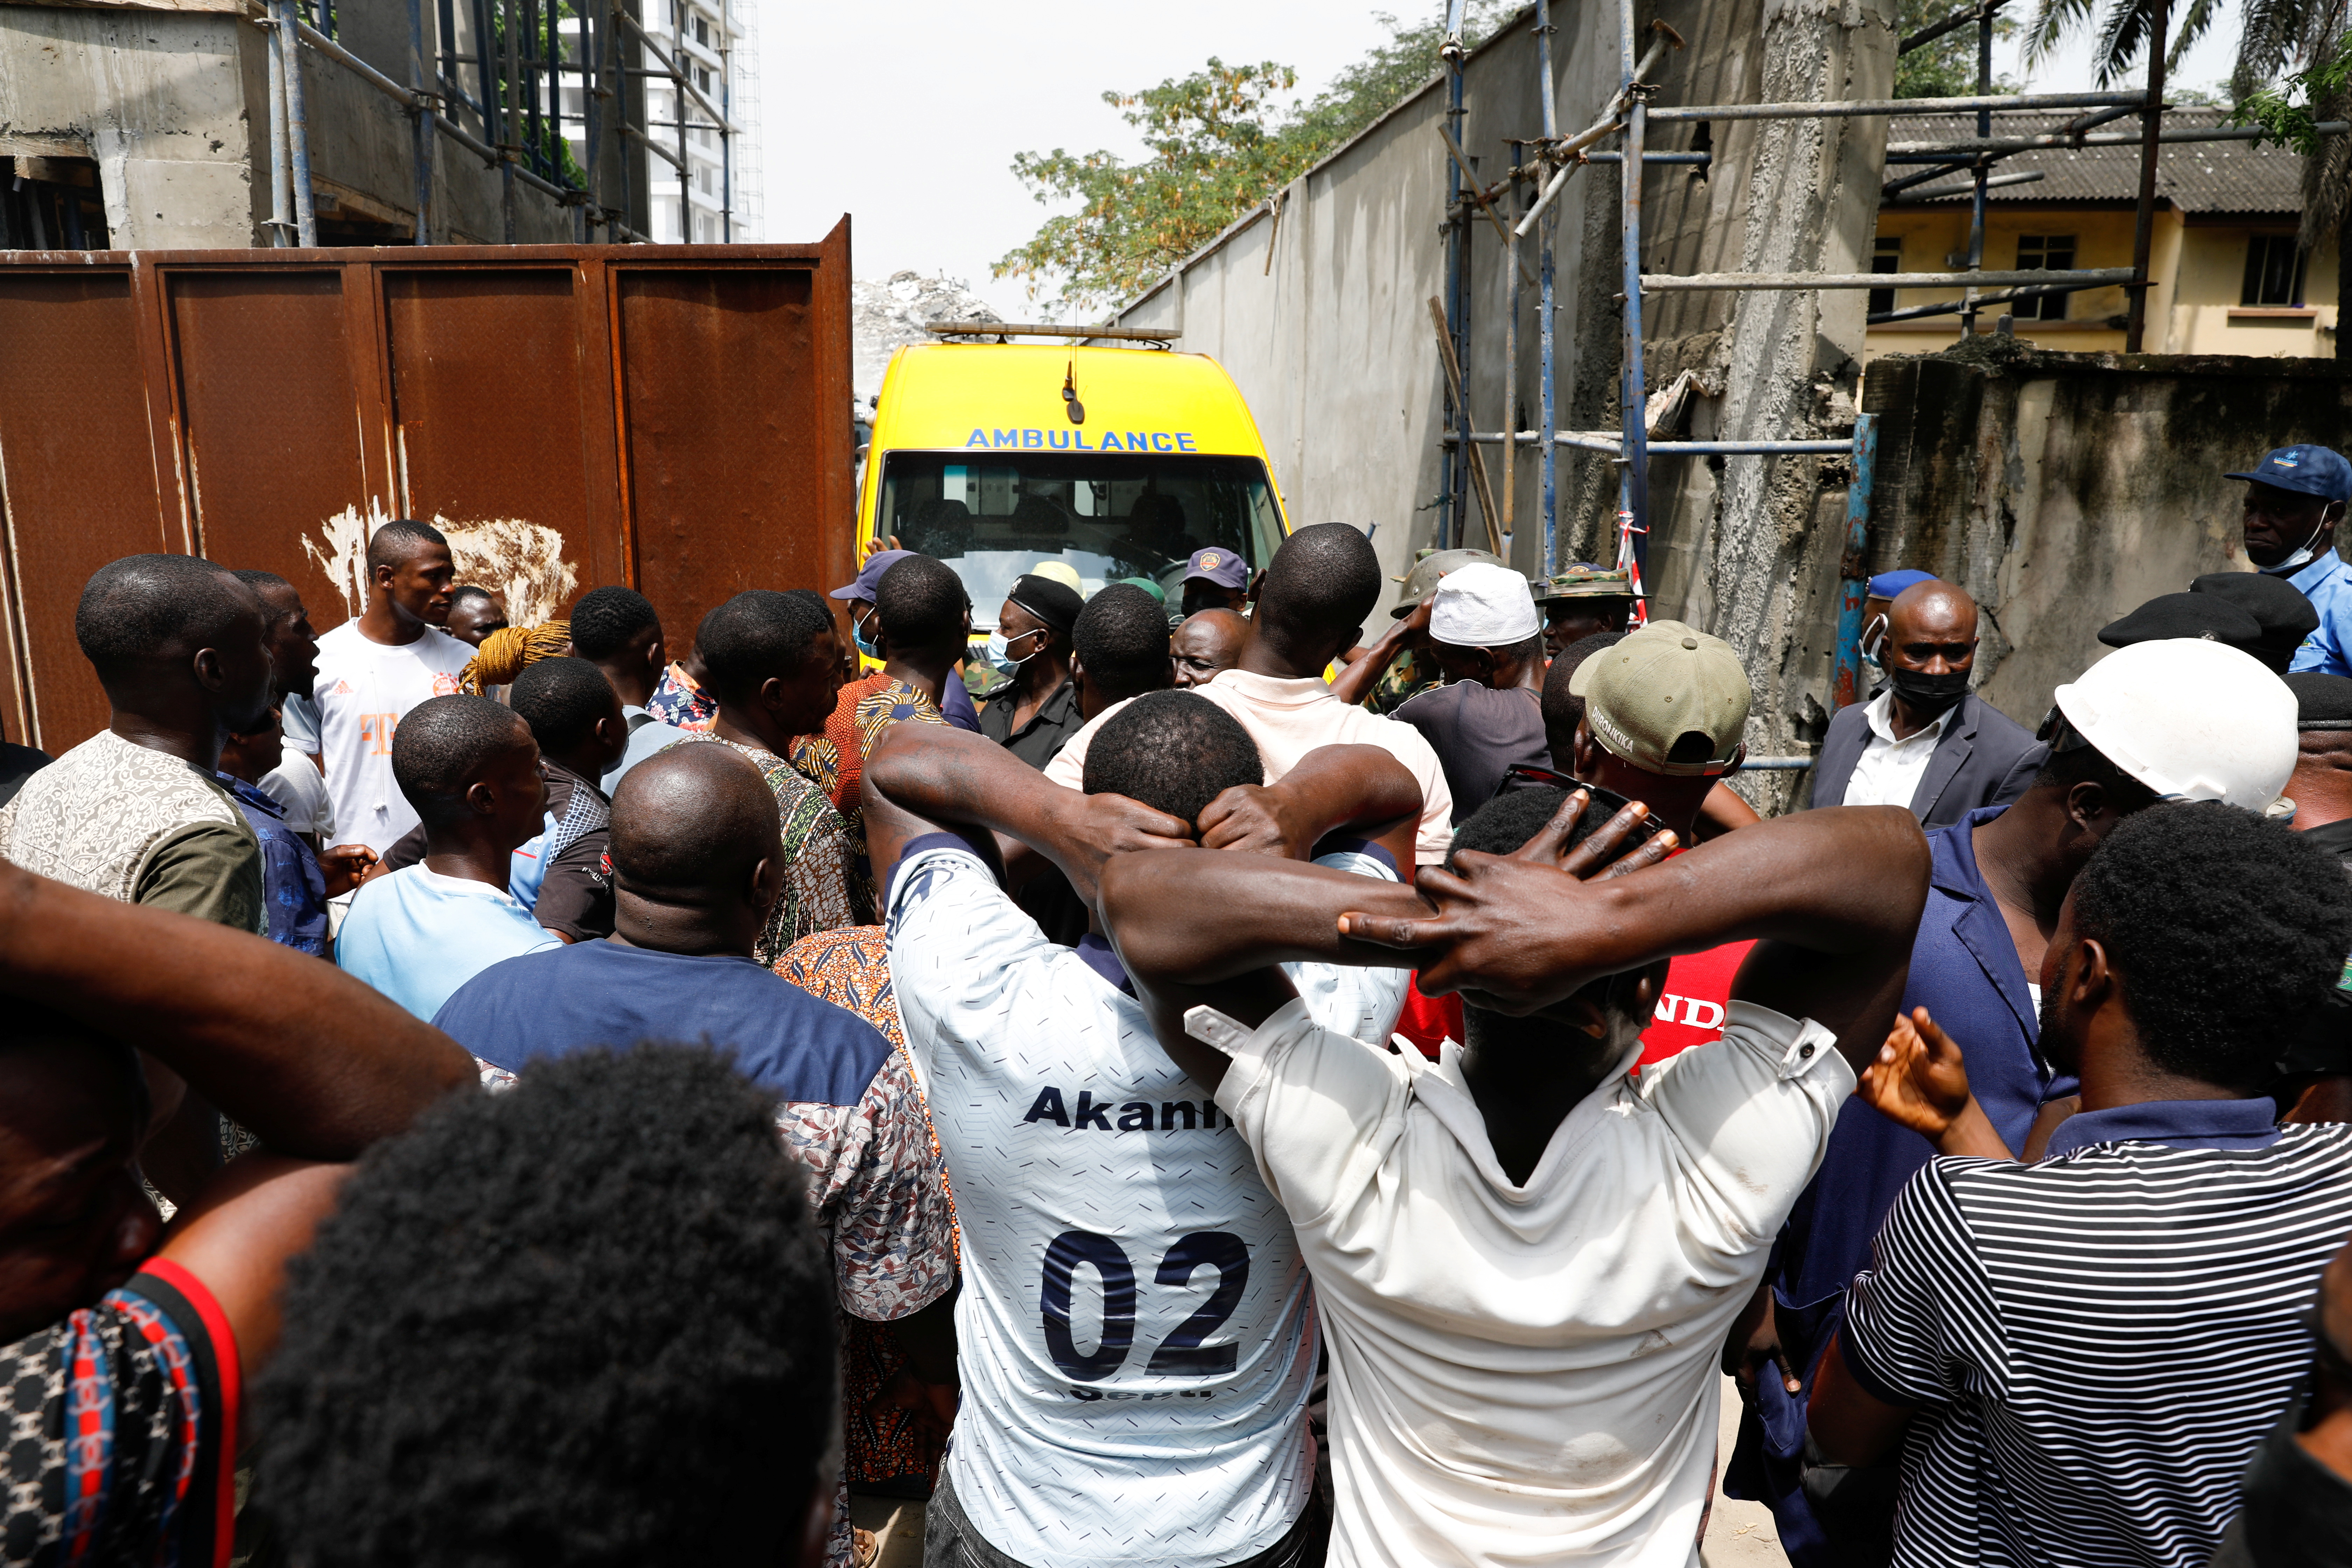 Relatives wait outside as rescue workers continue to conduct search and rescue effort at the site of a collapsed building in Ikoyi, Lagos, Nigeria, November 2, 2021. REUTERS/Temilade Adelaja